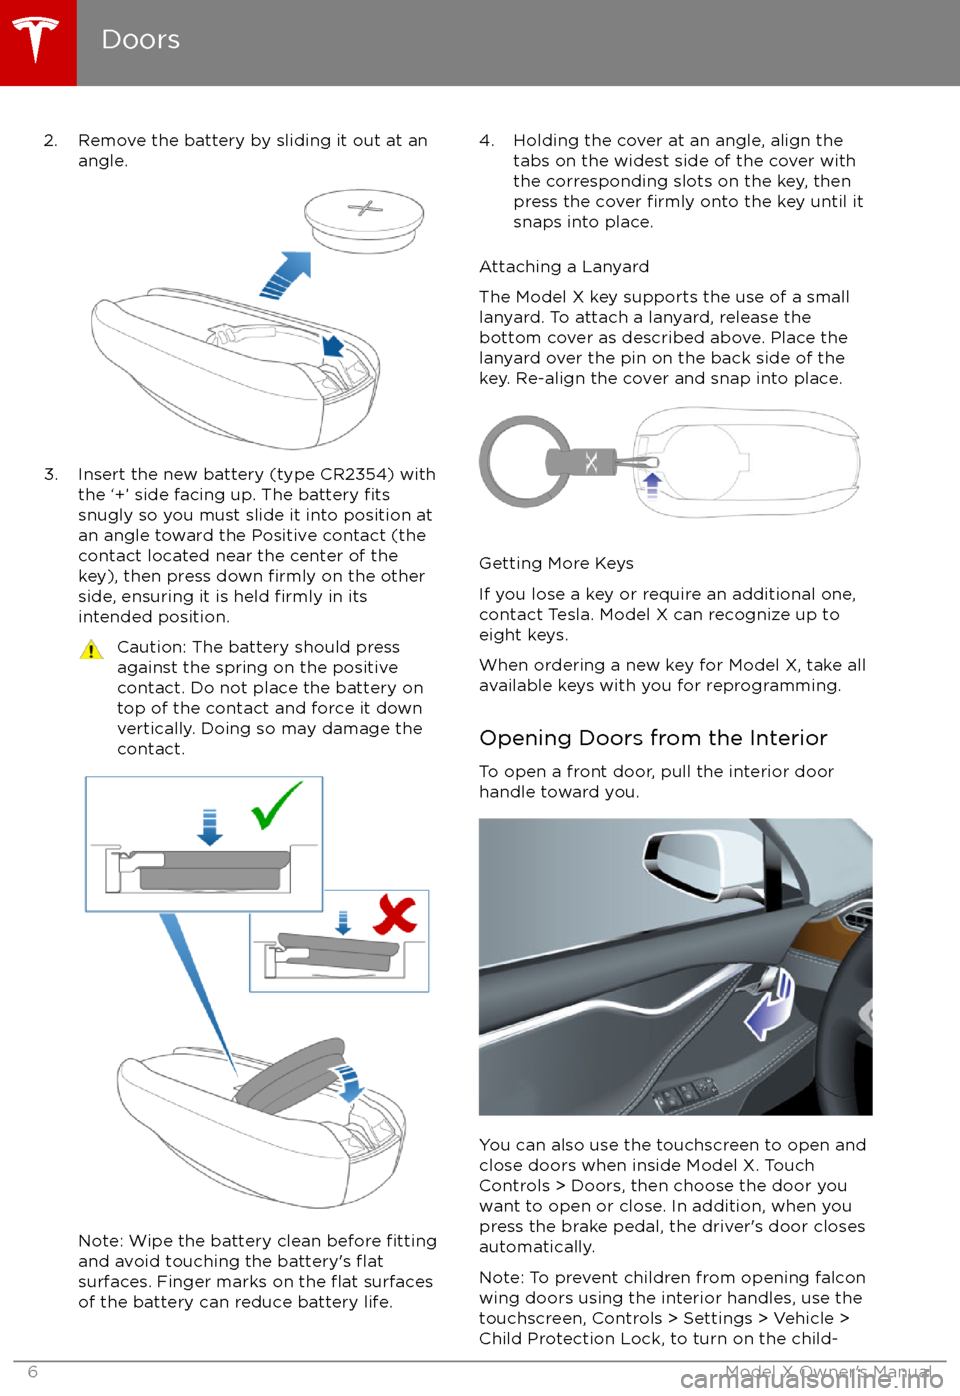 TESLA MODEL X 2017  Owners Manual (UK) 2. Remove the battery by sliding it out at anangle.
3. Insert the new battery (type CR2354) withthe 